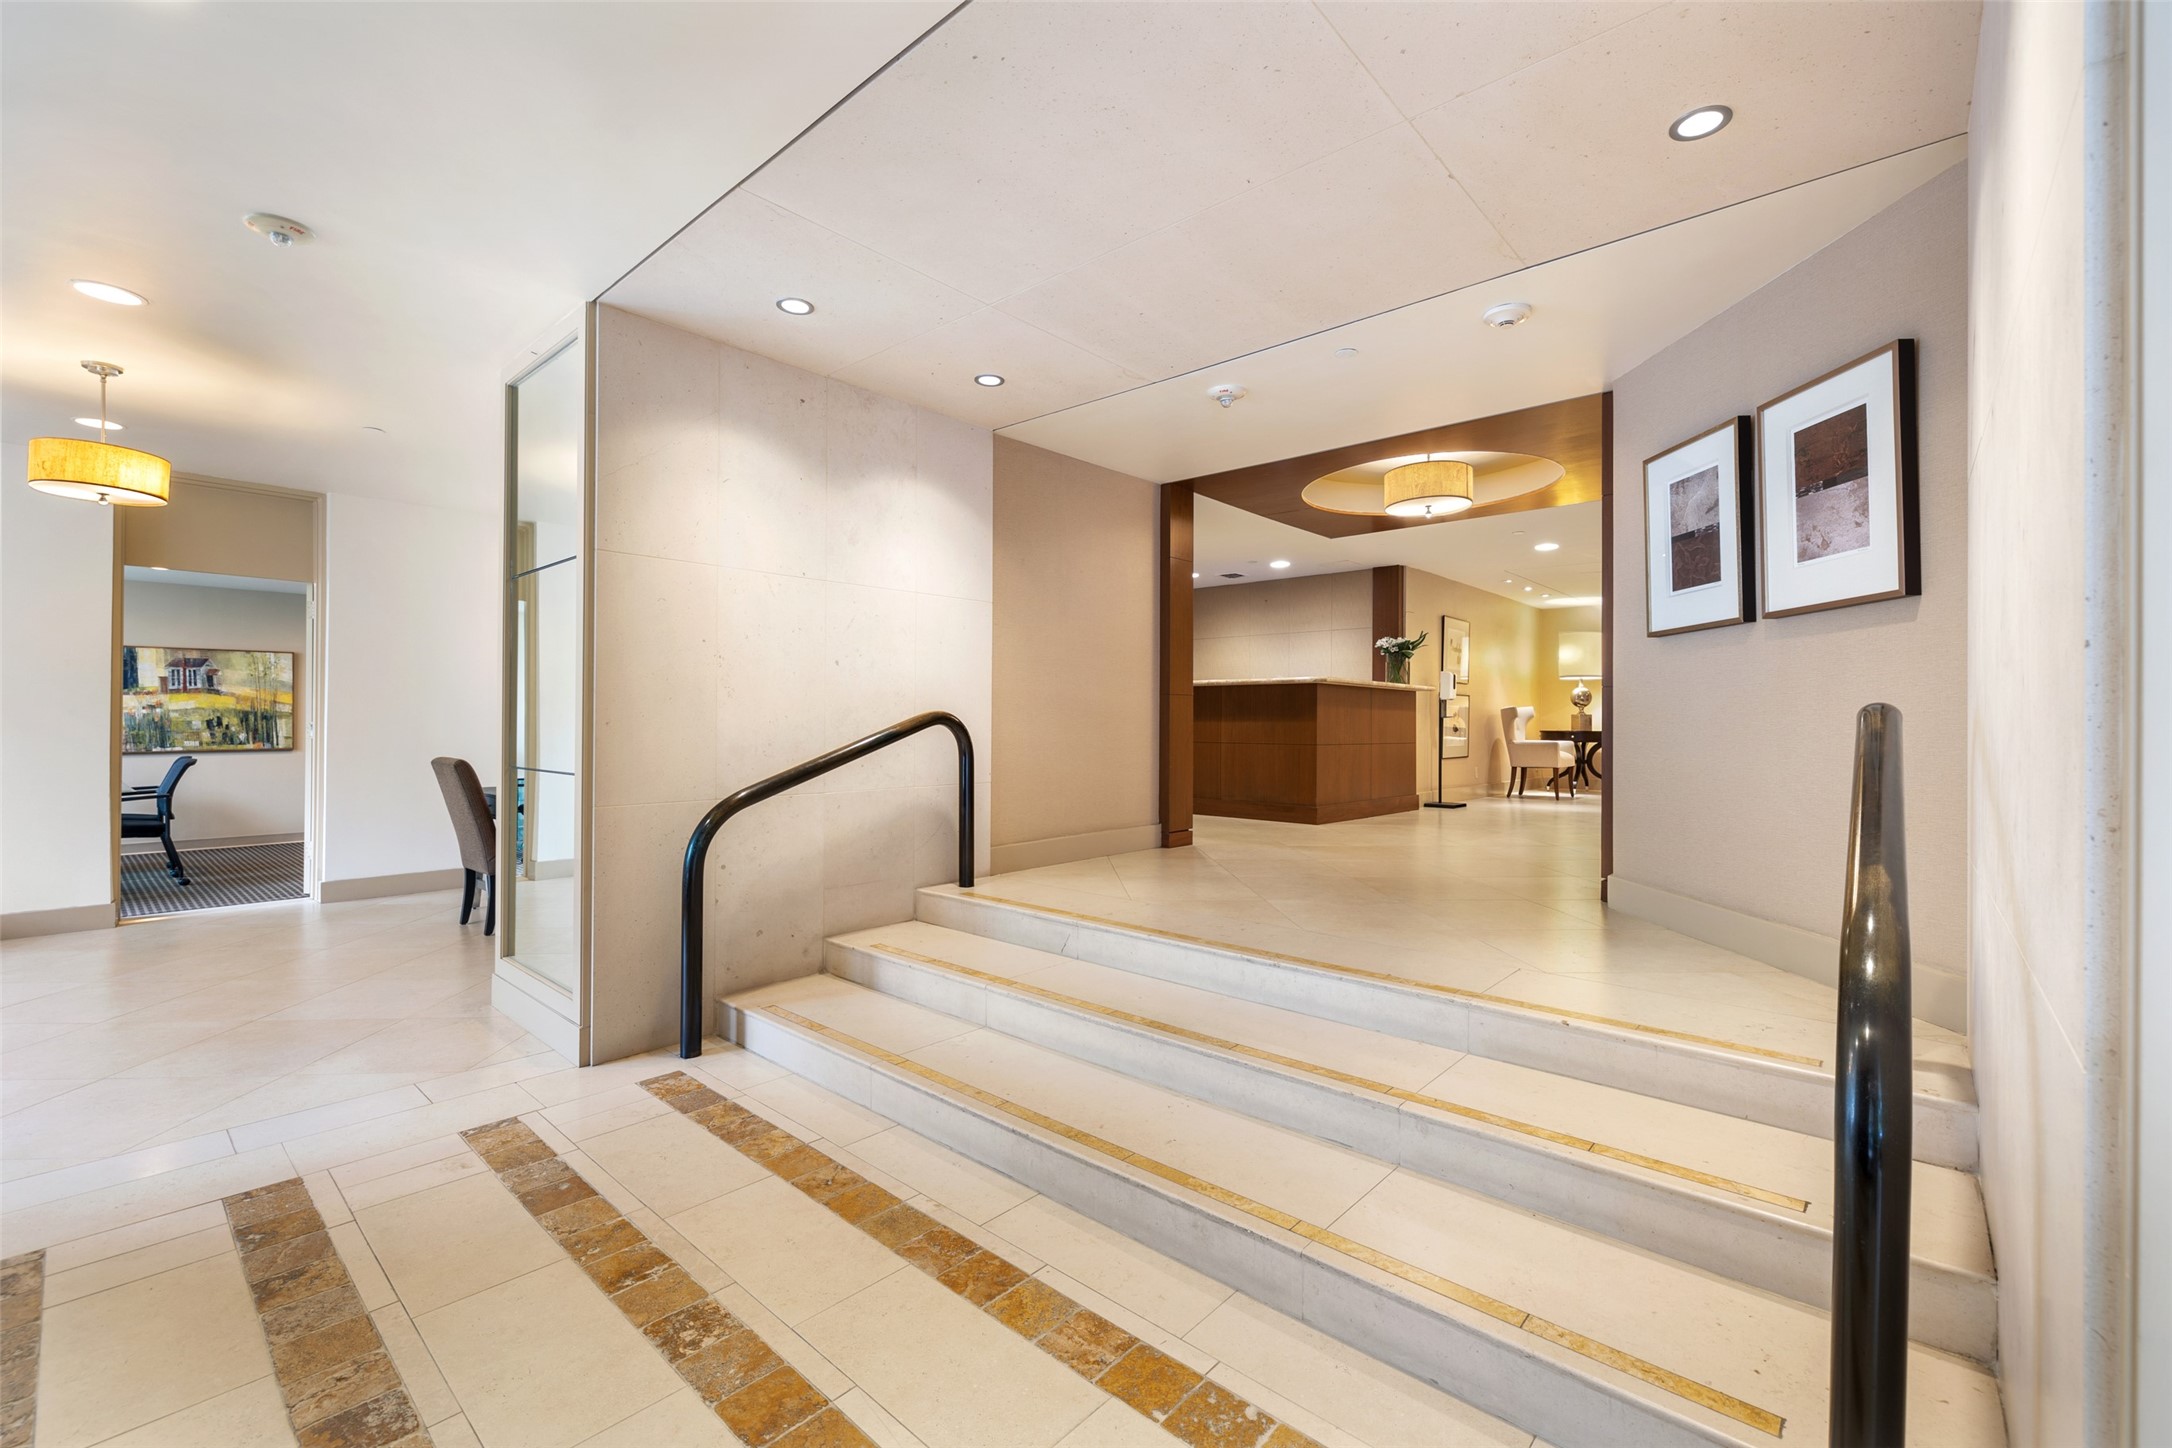 Stairs lead from the entry to the concierge desk and elevators